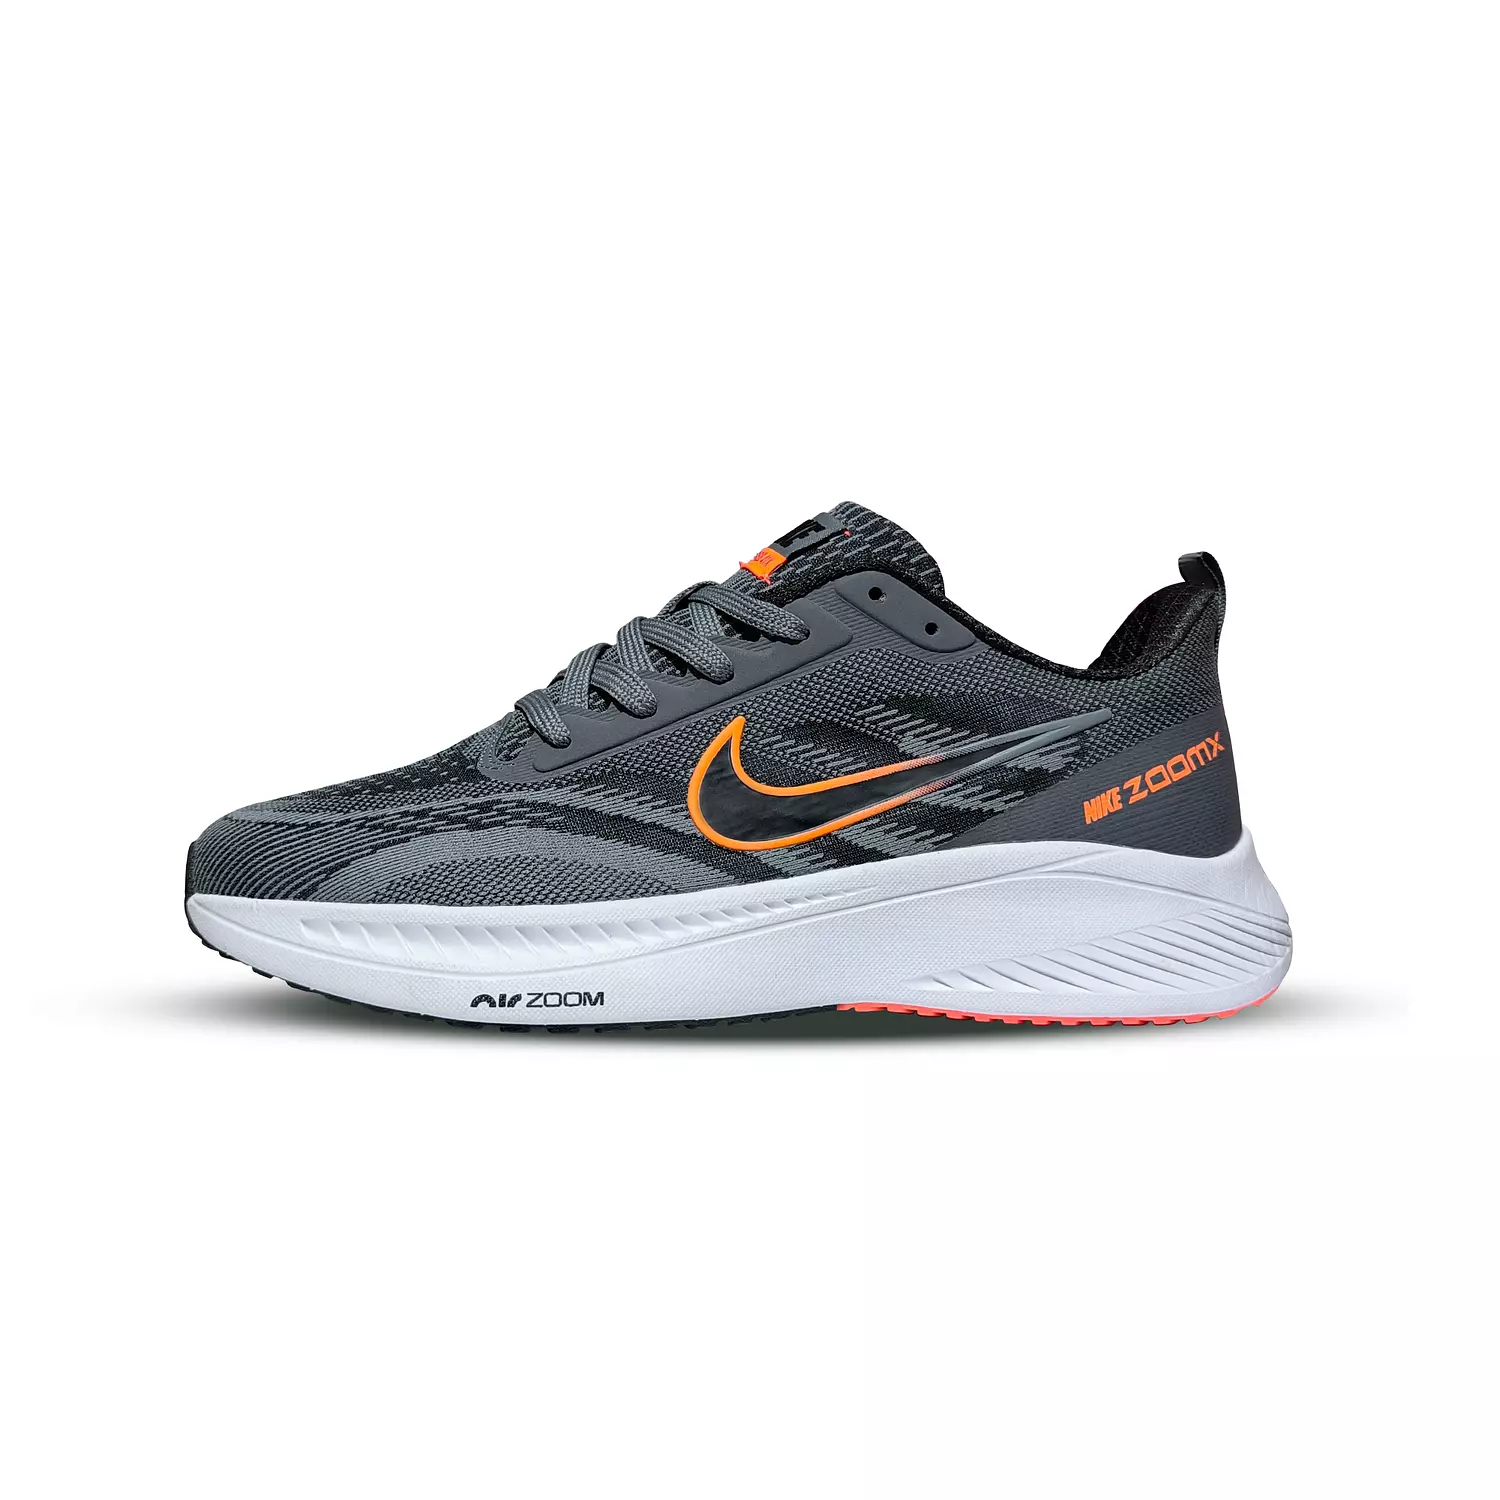 NIKE AIR ZOOM X -RUNNING SHOES 2